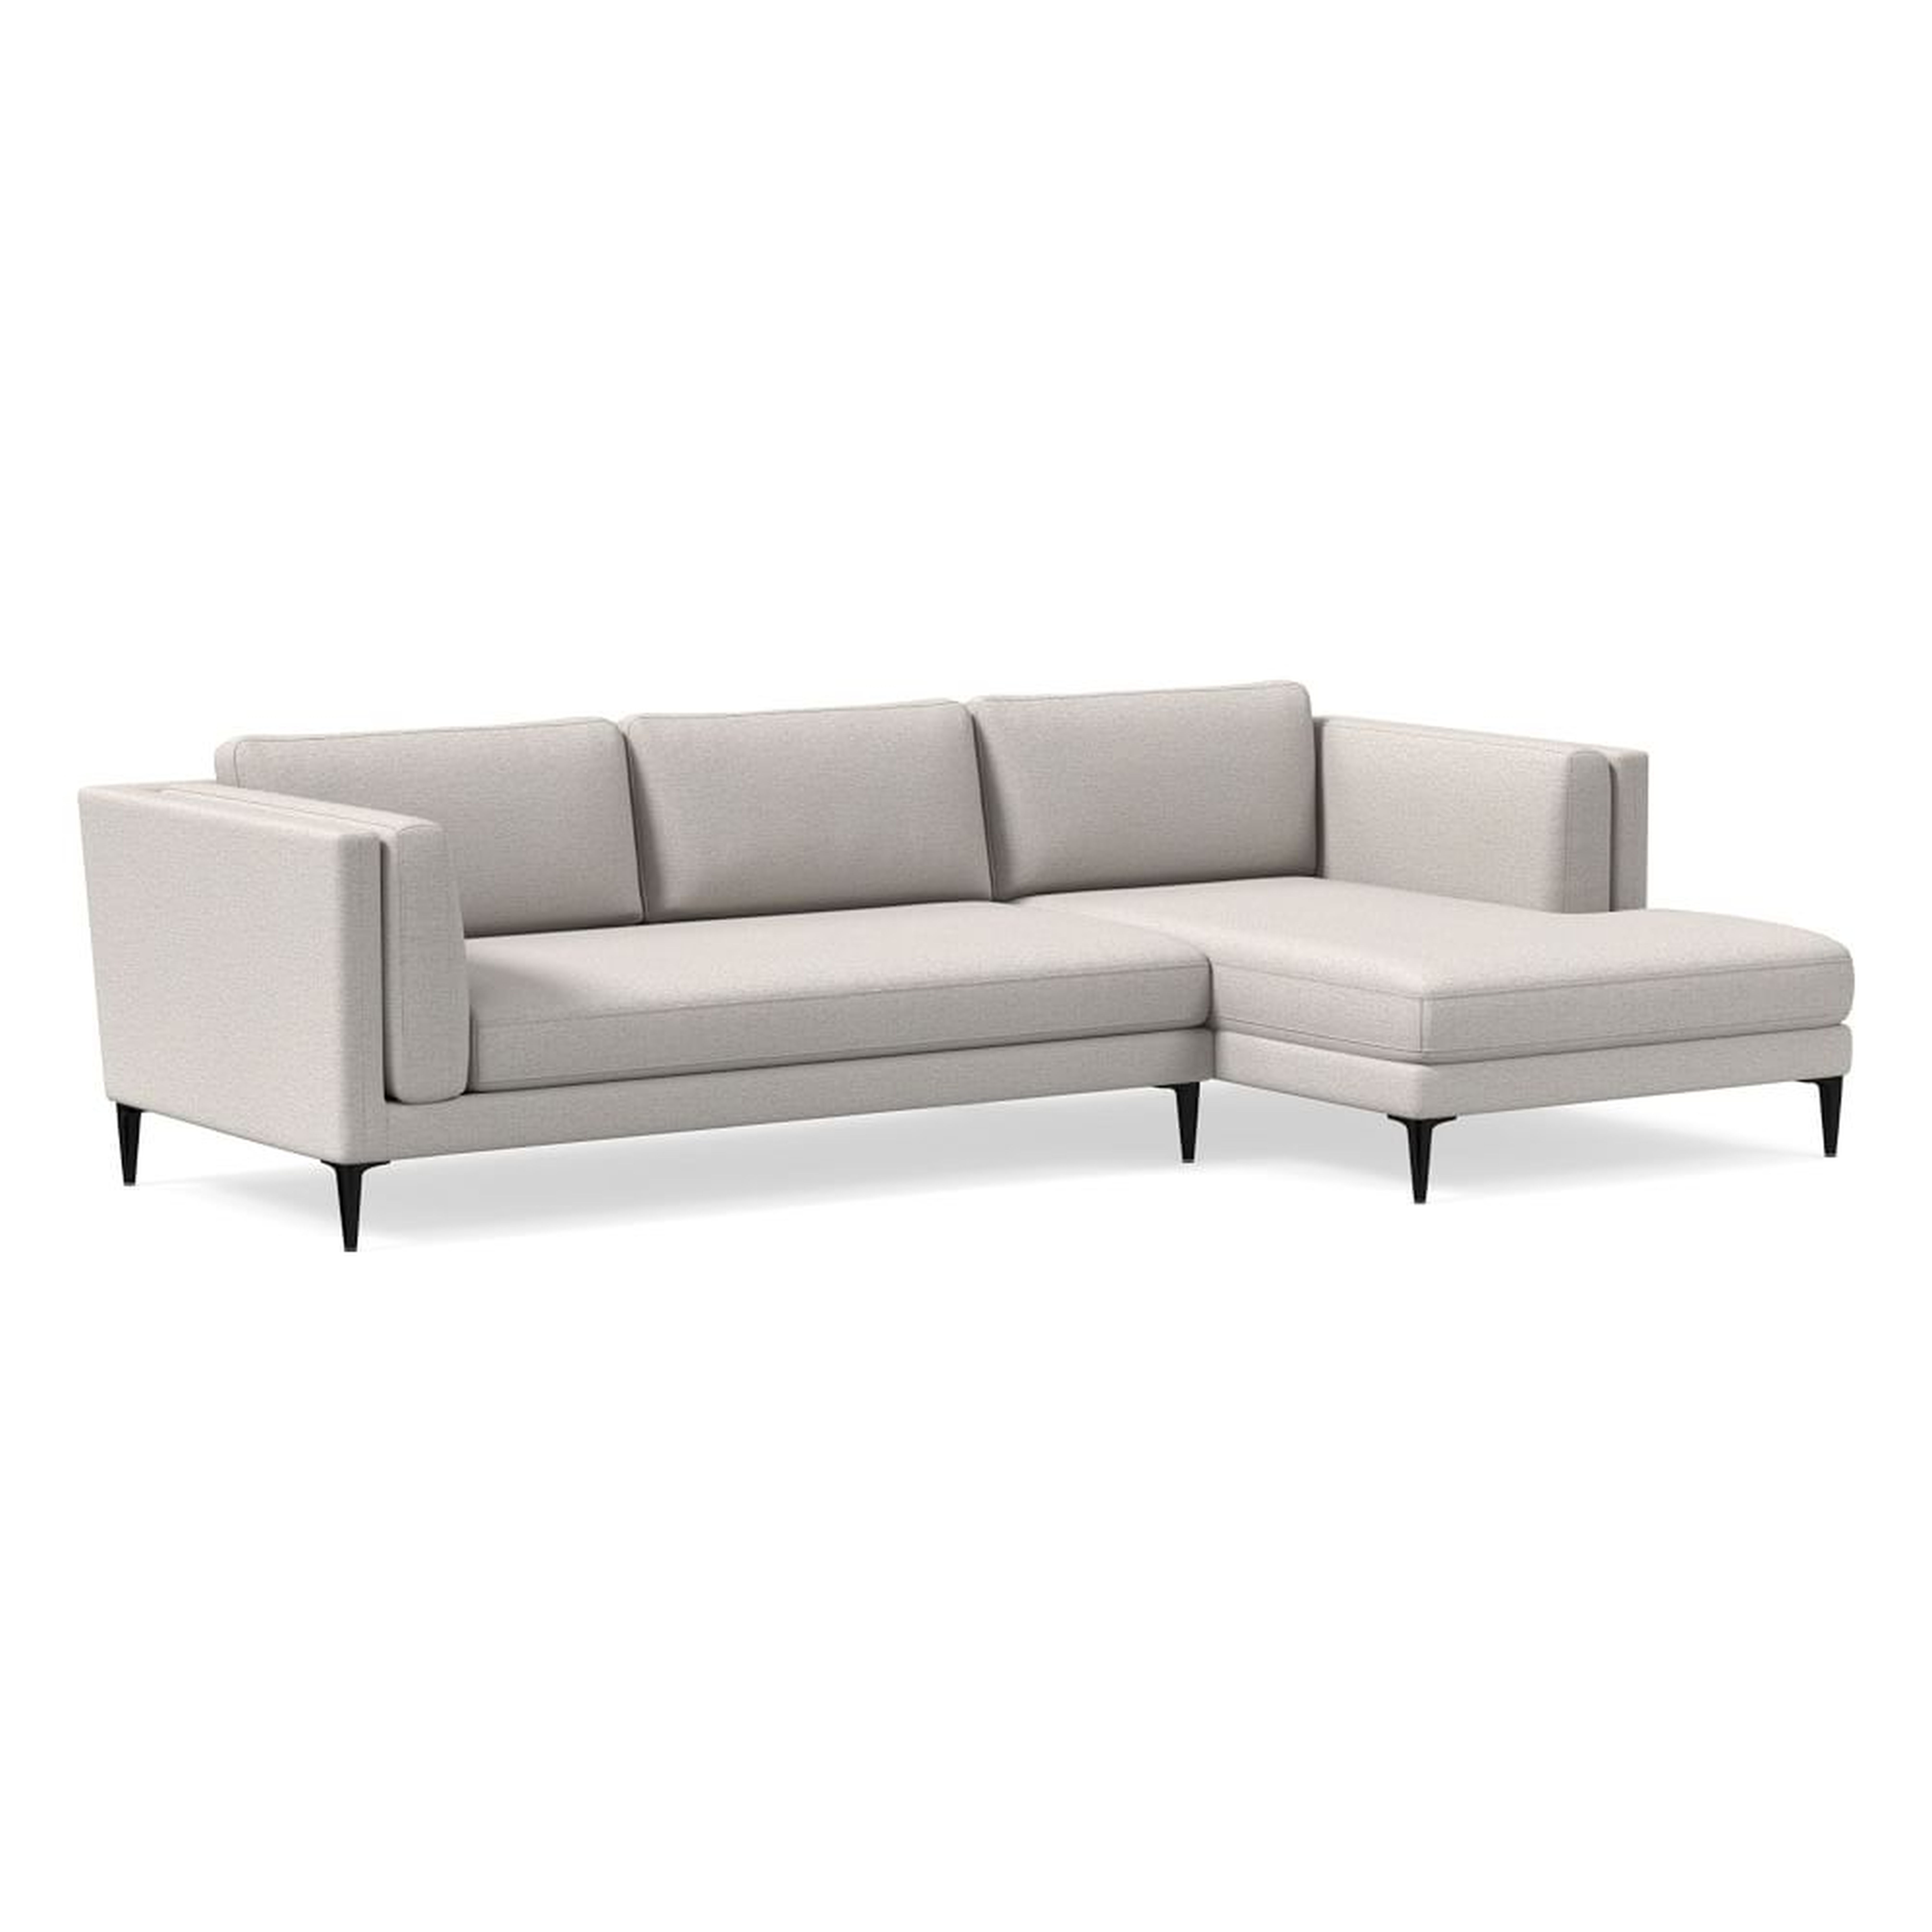 Anton 105" Right 2-Piece Chaise Sectional, Twill, Sand, Dark Pewter - West Elm